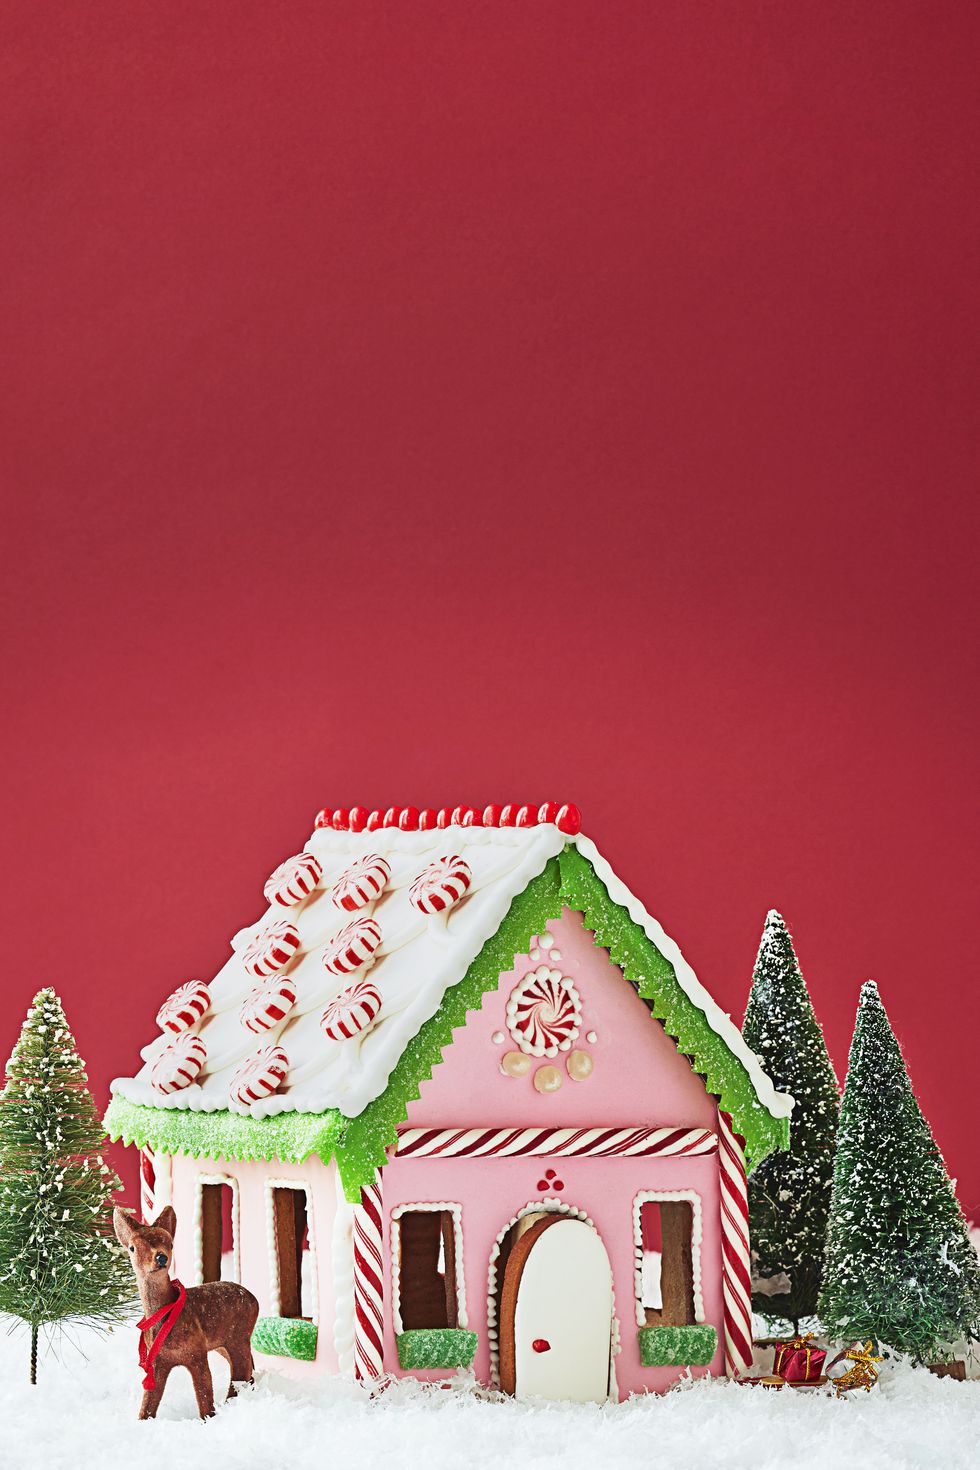 55 Best Gingerbread Houses - Pictures of Gingerbread House Design Ideas